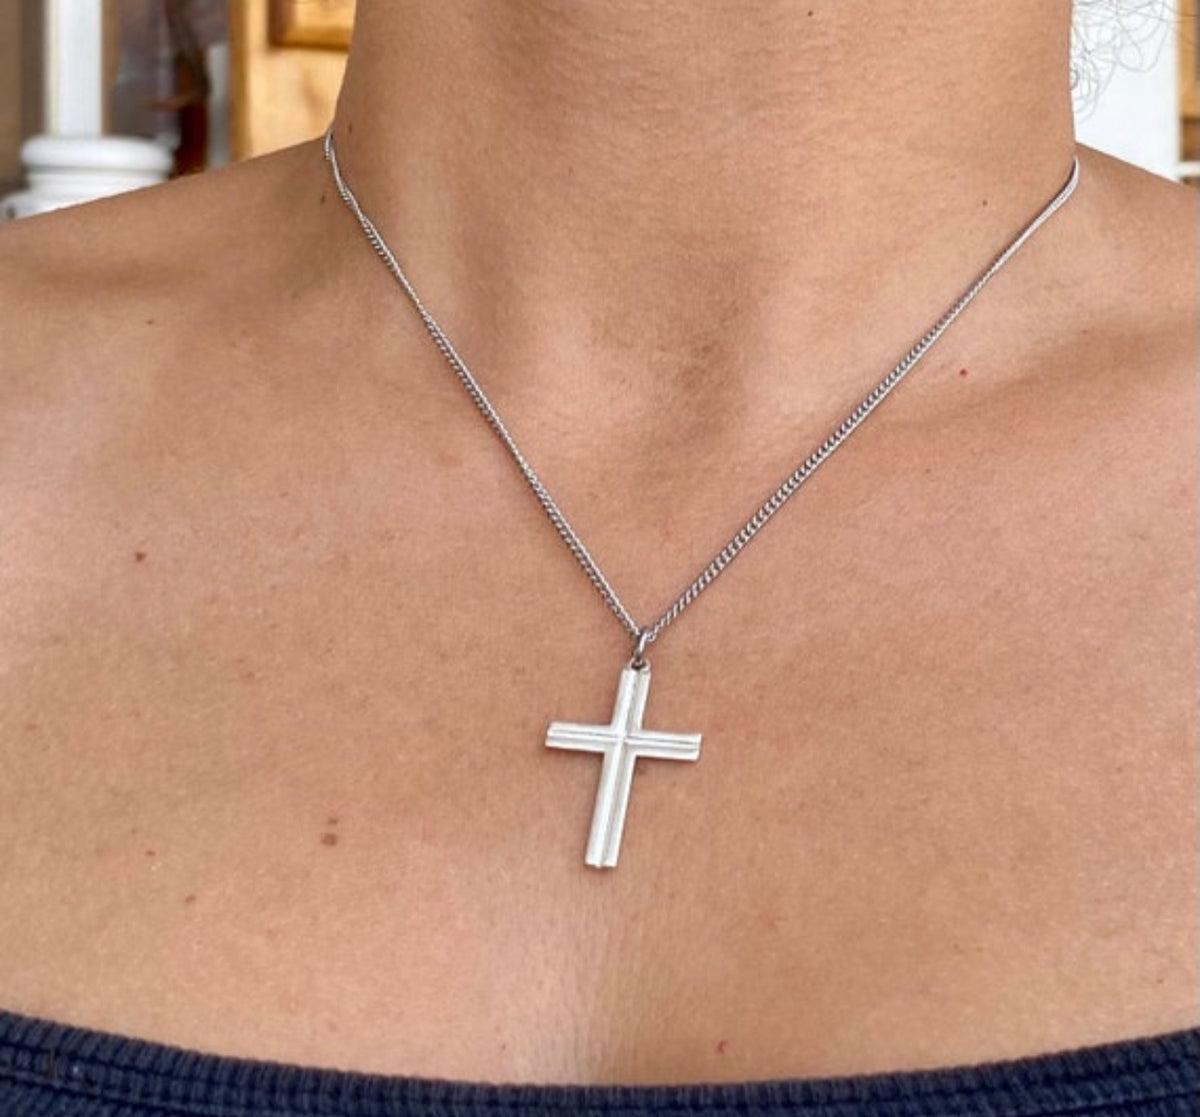 Silver cross necklace with stainless steel chain